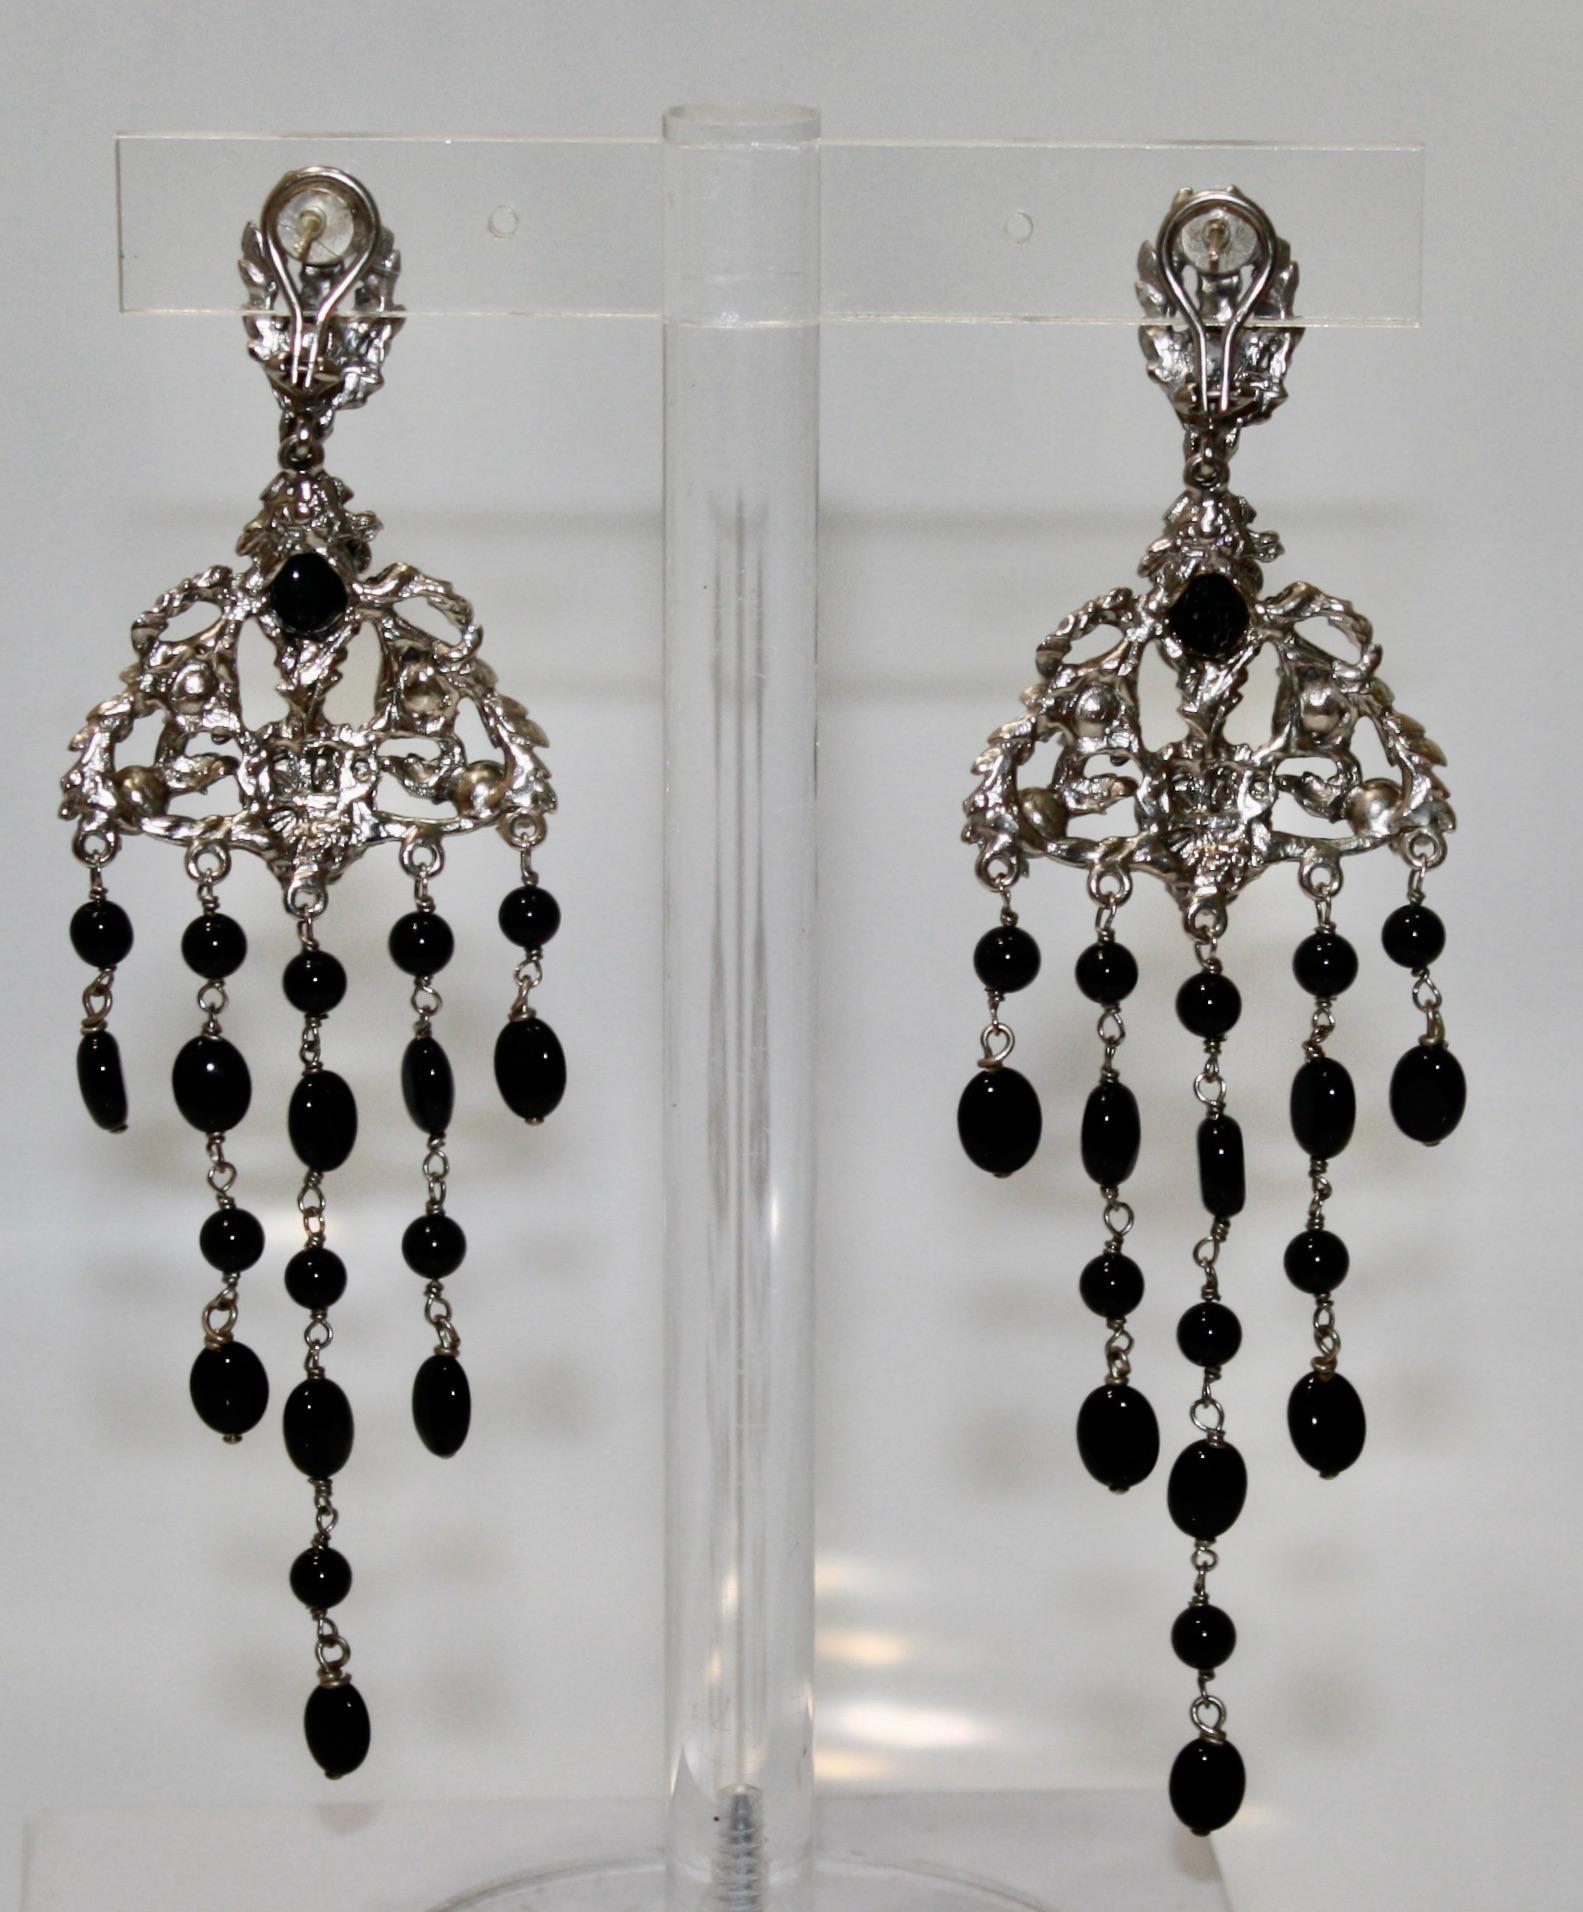 French back chandelier earrings with tinted pink rock crystal cabochons, black onyx chain drop . Ruthenium metal